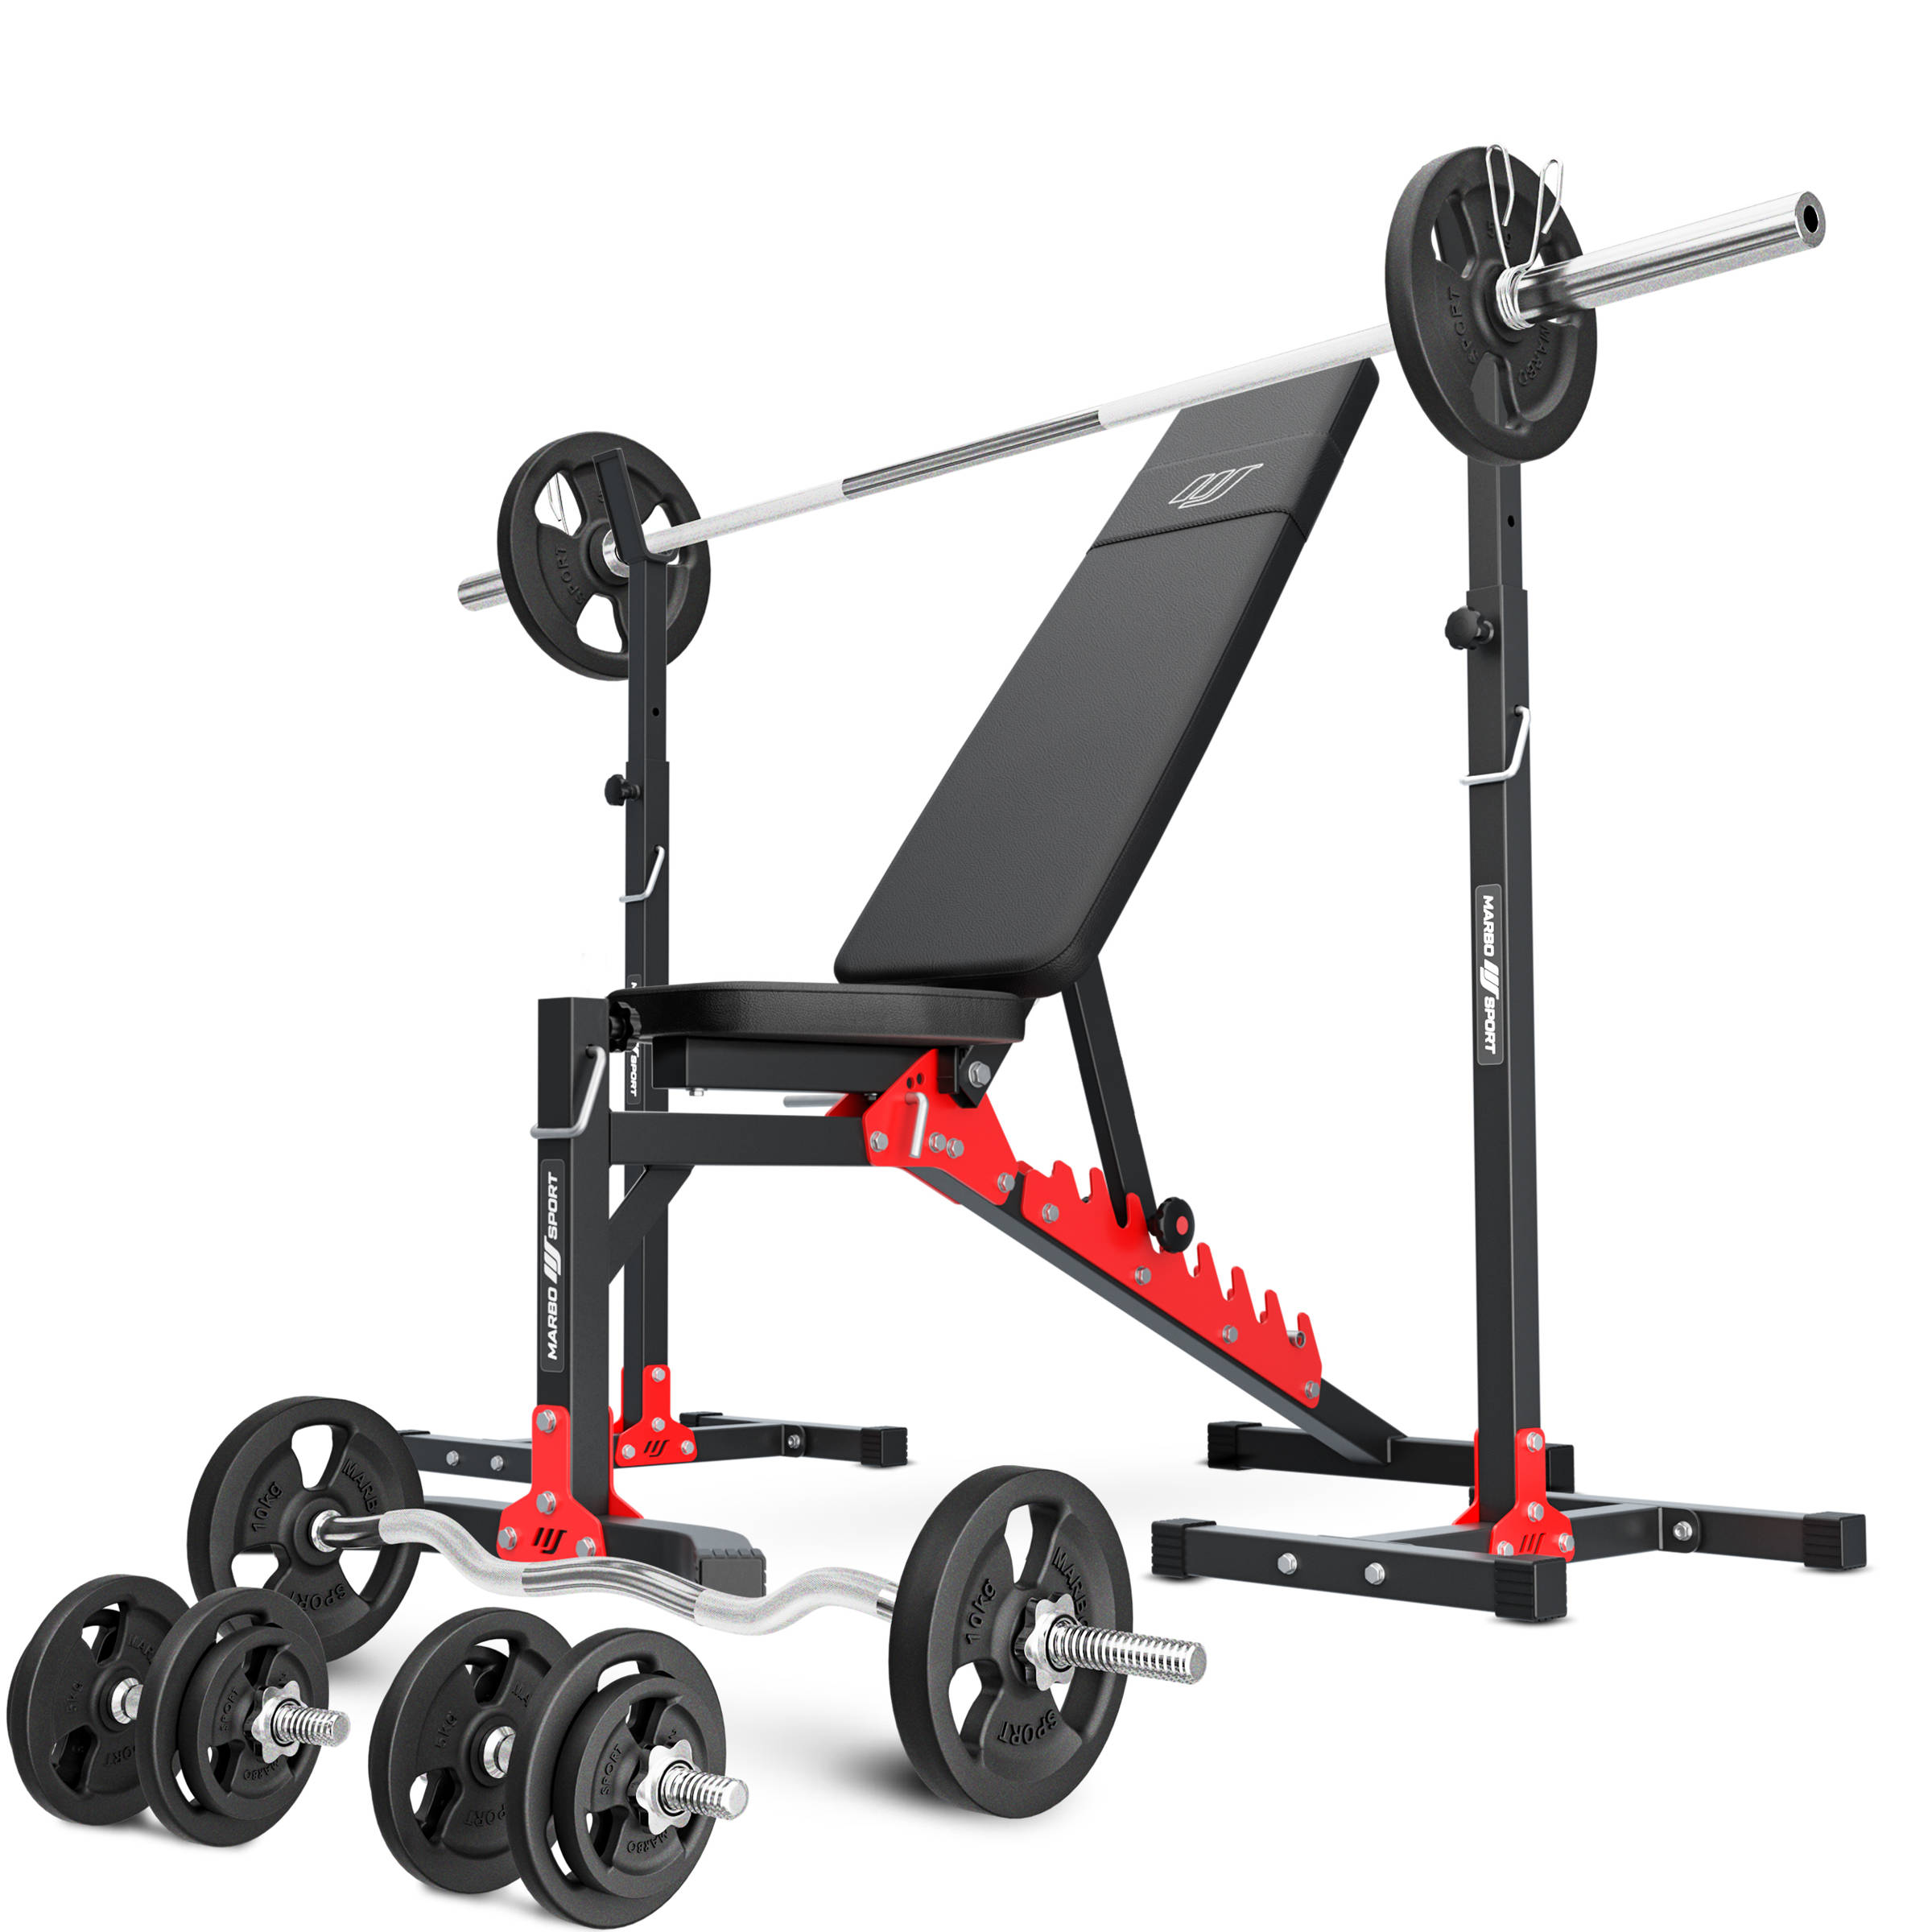 MH19_111KG_KIER | Adjustable bench with adapter MH-L115 + Adjustable exercise racks stands + reinforced bars and weights set 83 kg - Marbo Sport Cast iron kg | Strength equipment \